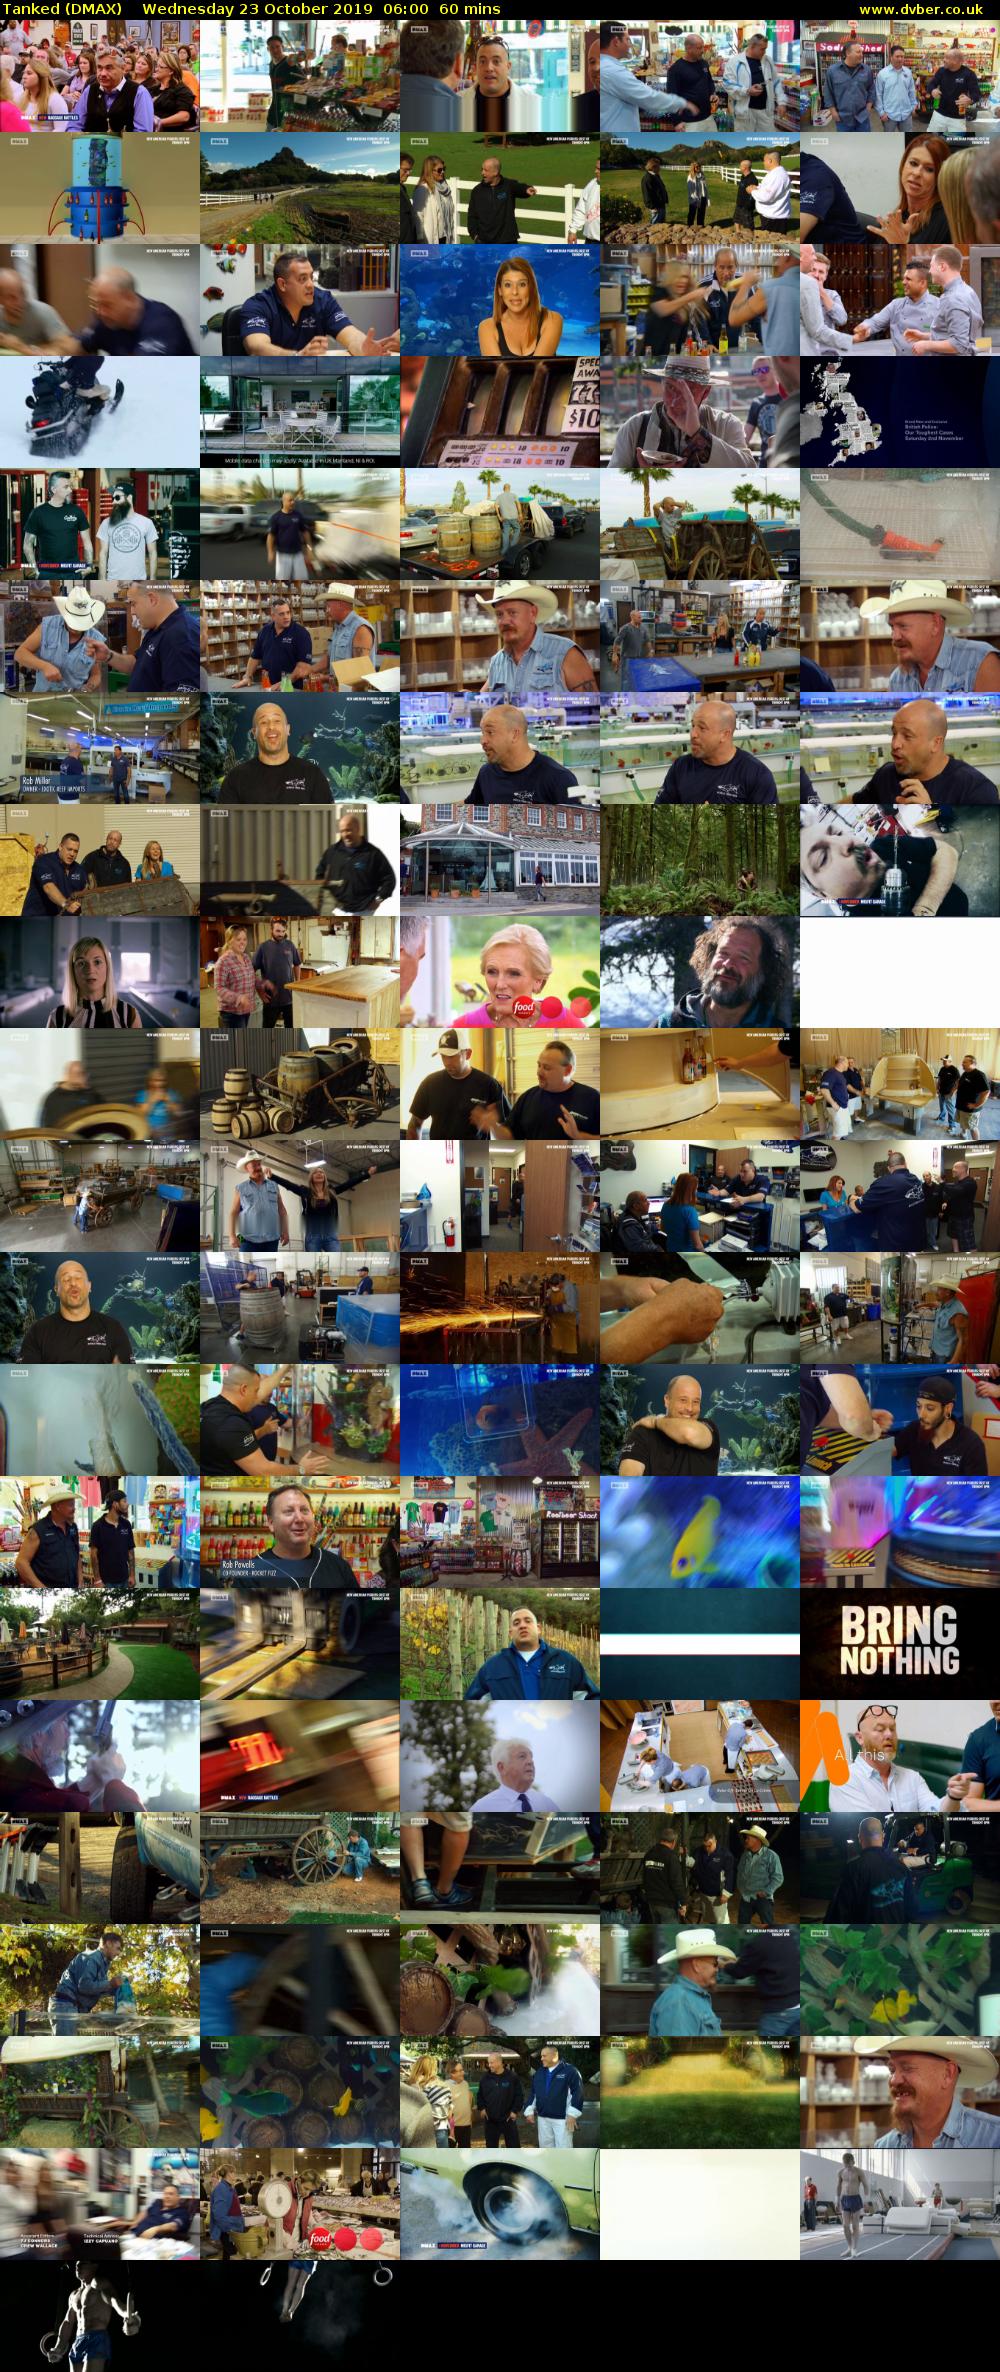 Tanked (DMAX) Wednesday 23 October 2019 06:00 - 07:00